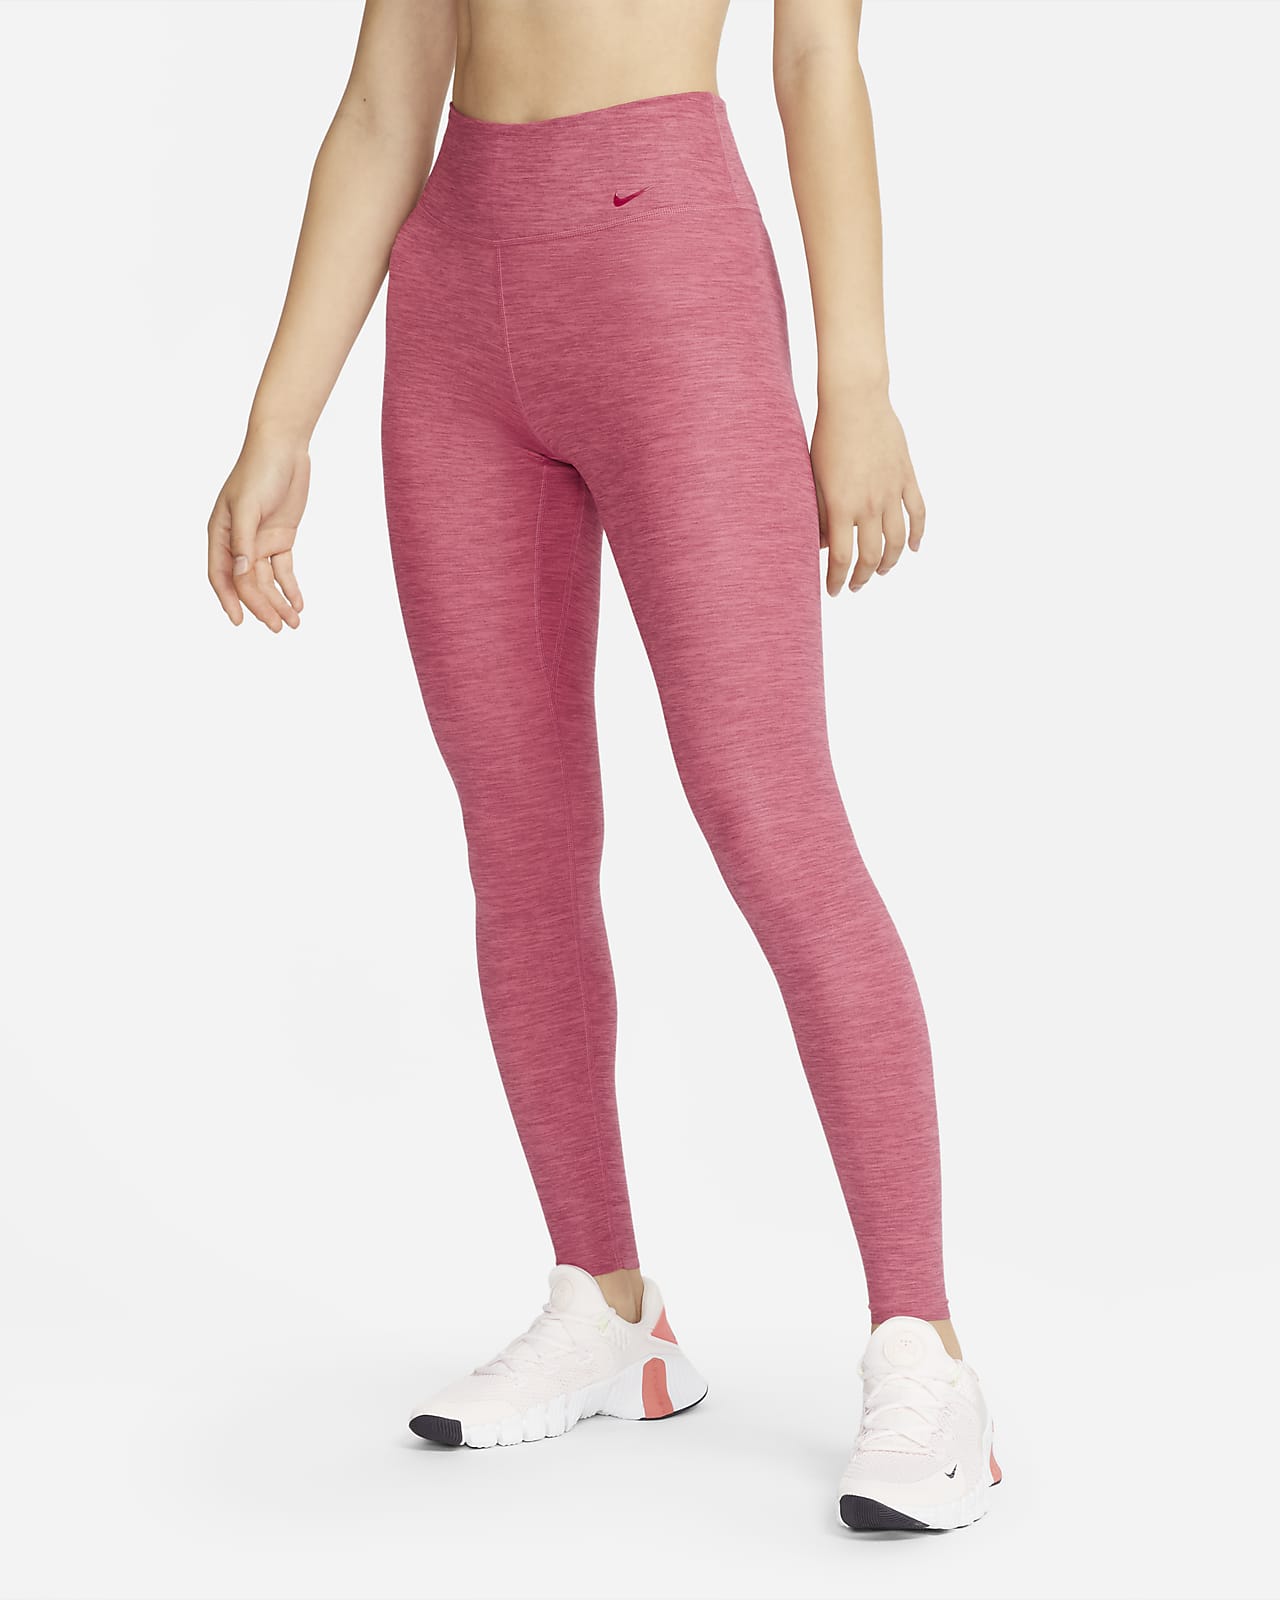 Nike One Luxe Women's Heathered Mid-Rise Leggings